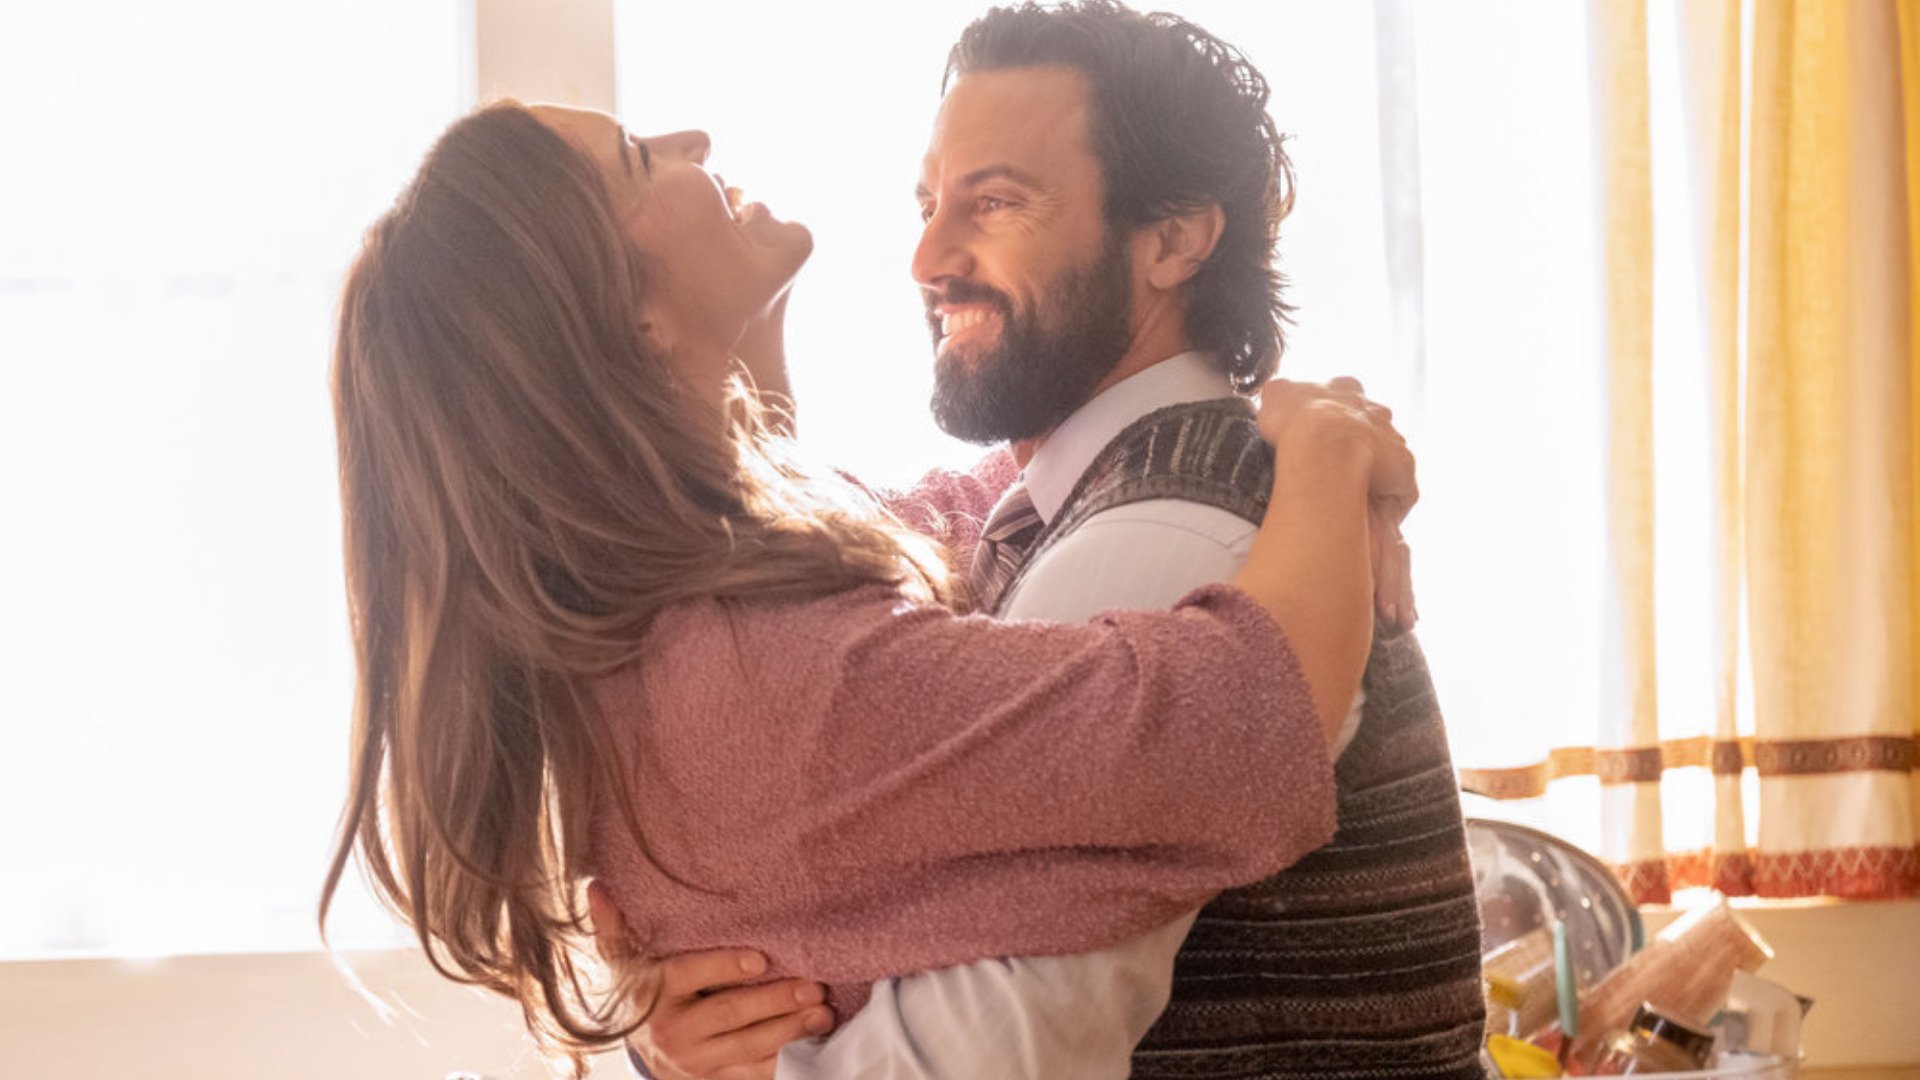 Mandy Moore as Rebecca and Milo Ventimiglia as Jack dancing in ‘This Is Us’ Season 6 Episode 1